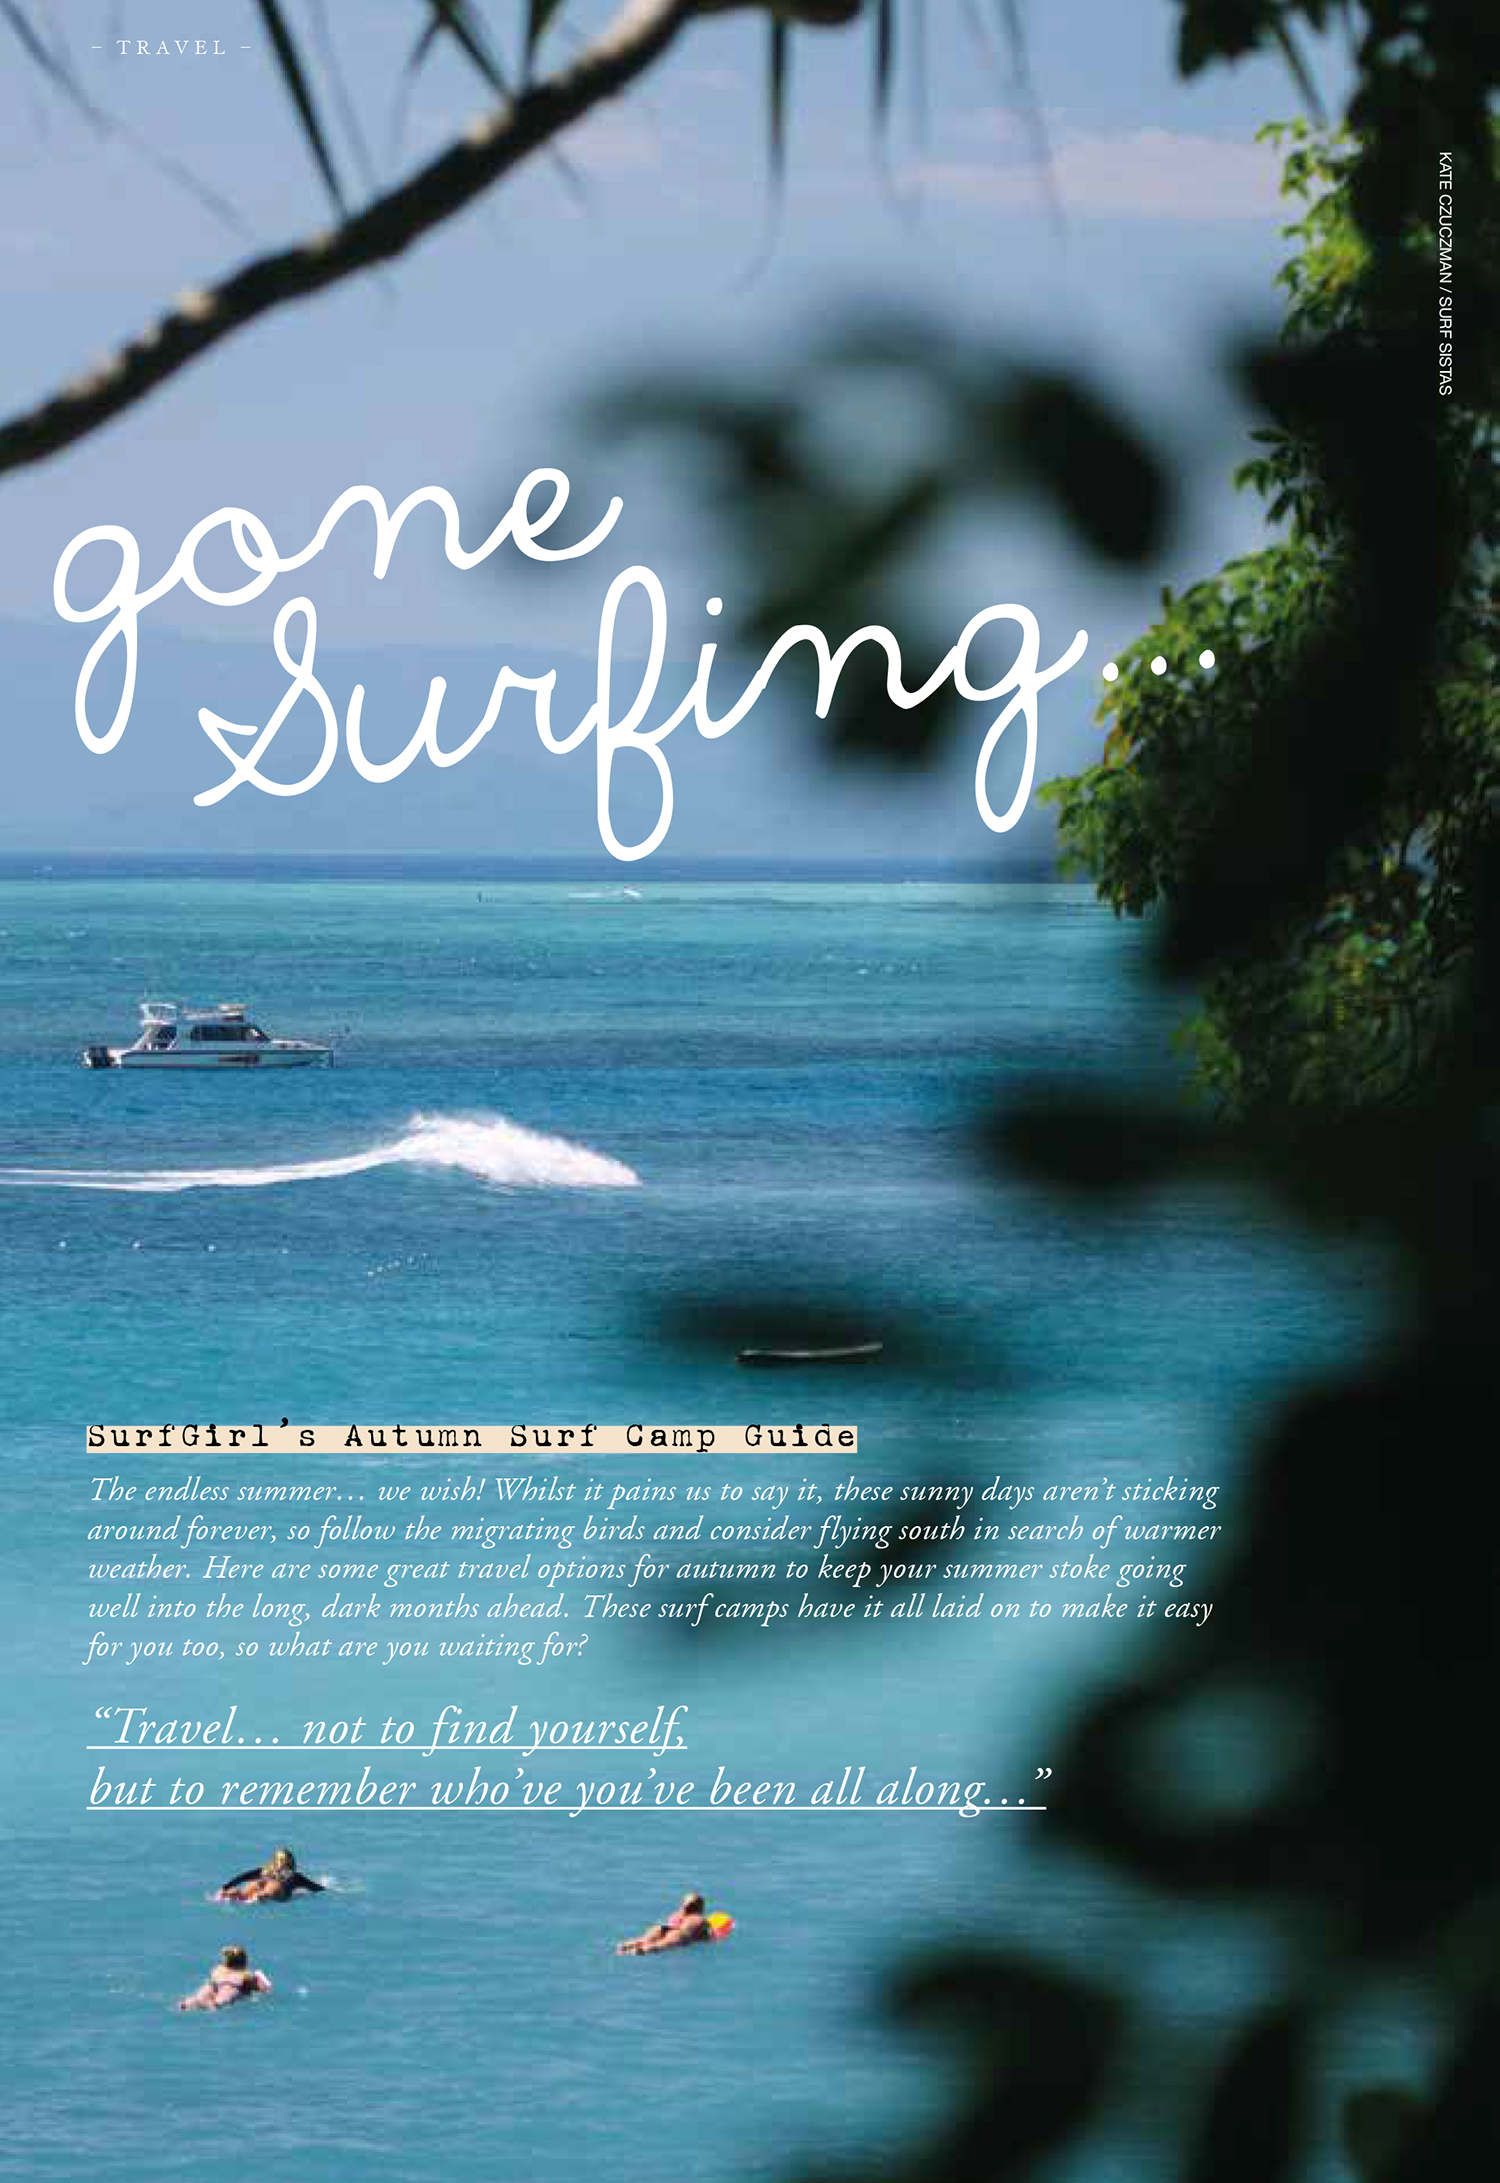 Surfgirl Magazine - Travel Guide featuring Surf Sistas paddling out at Playgrounds, Nusa Lembongan